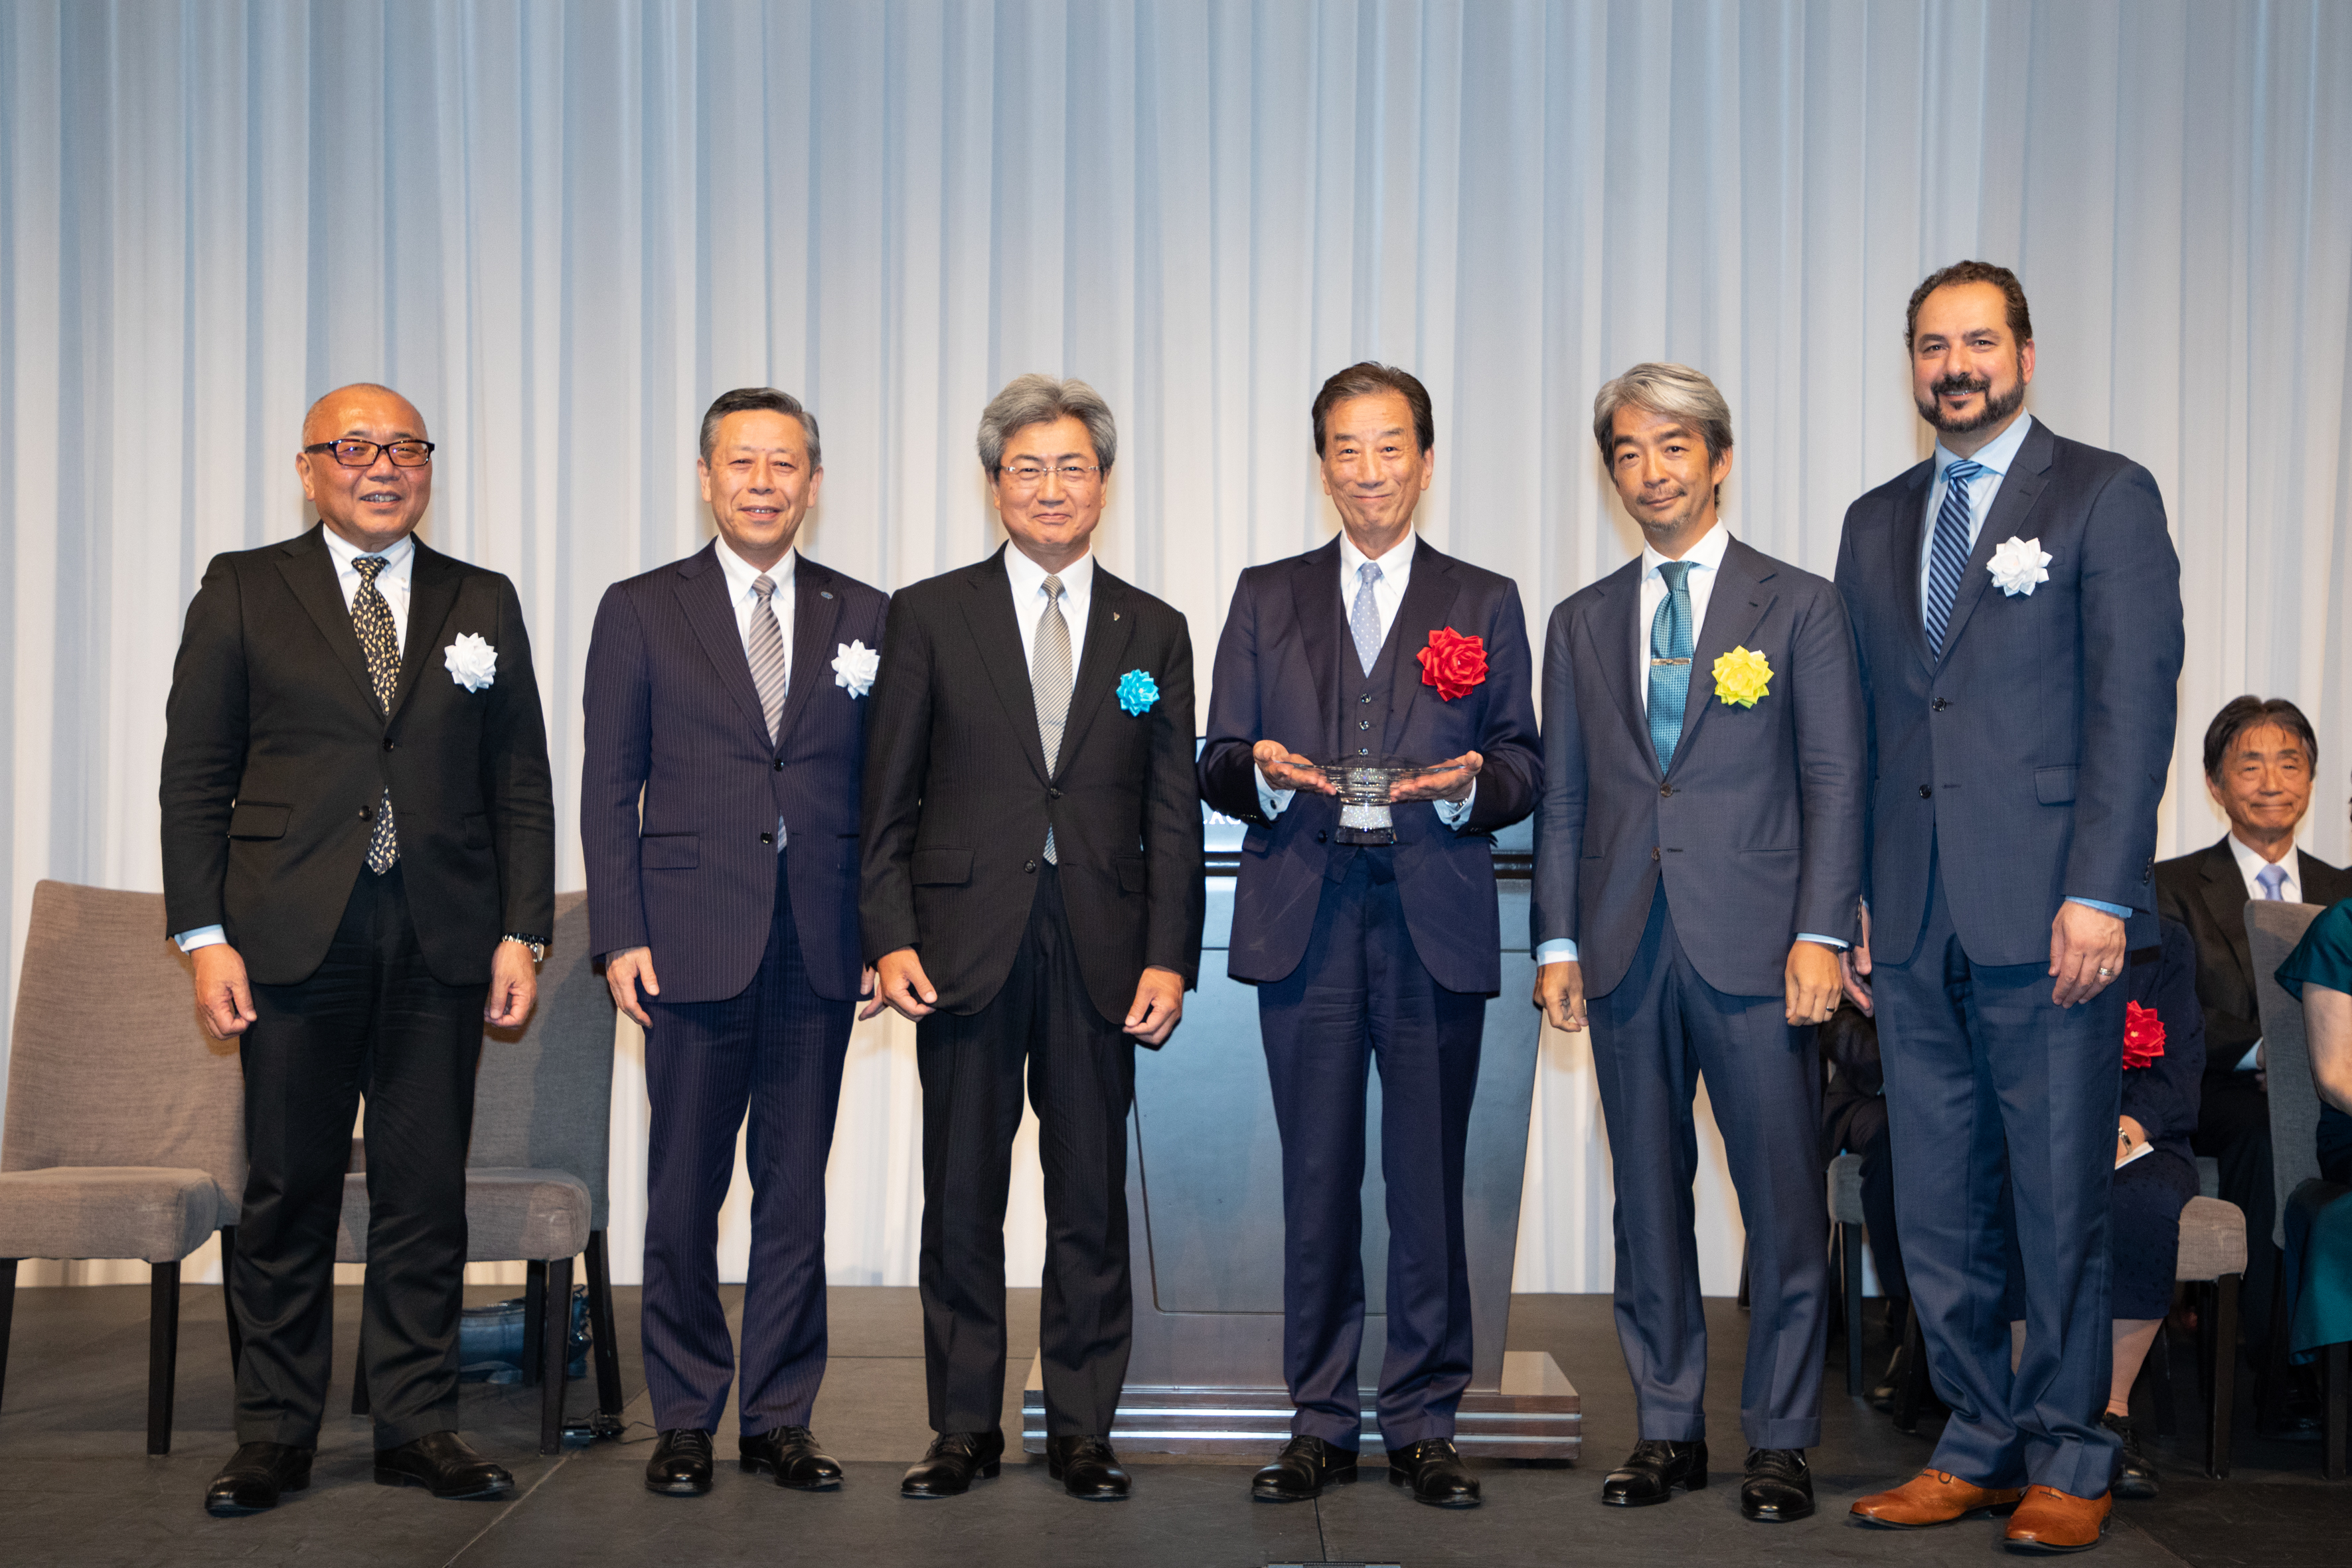 [Award Report] The 4th Lights Upon the Mountain Awards (Co-hosted by the Japan Hospital Association, the All Japan Hospital Association, and the Celgene Corporation, June 20, 2018)